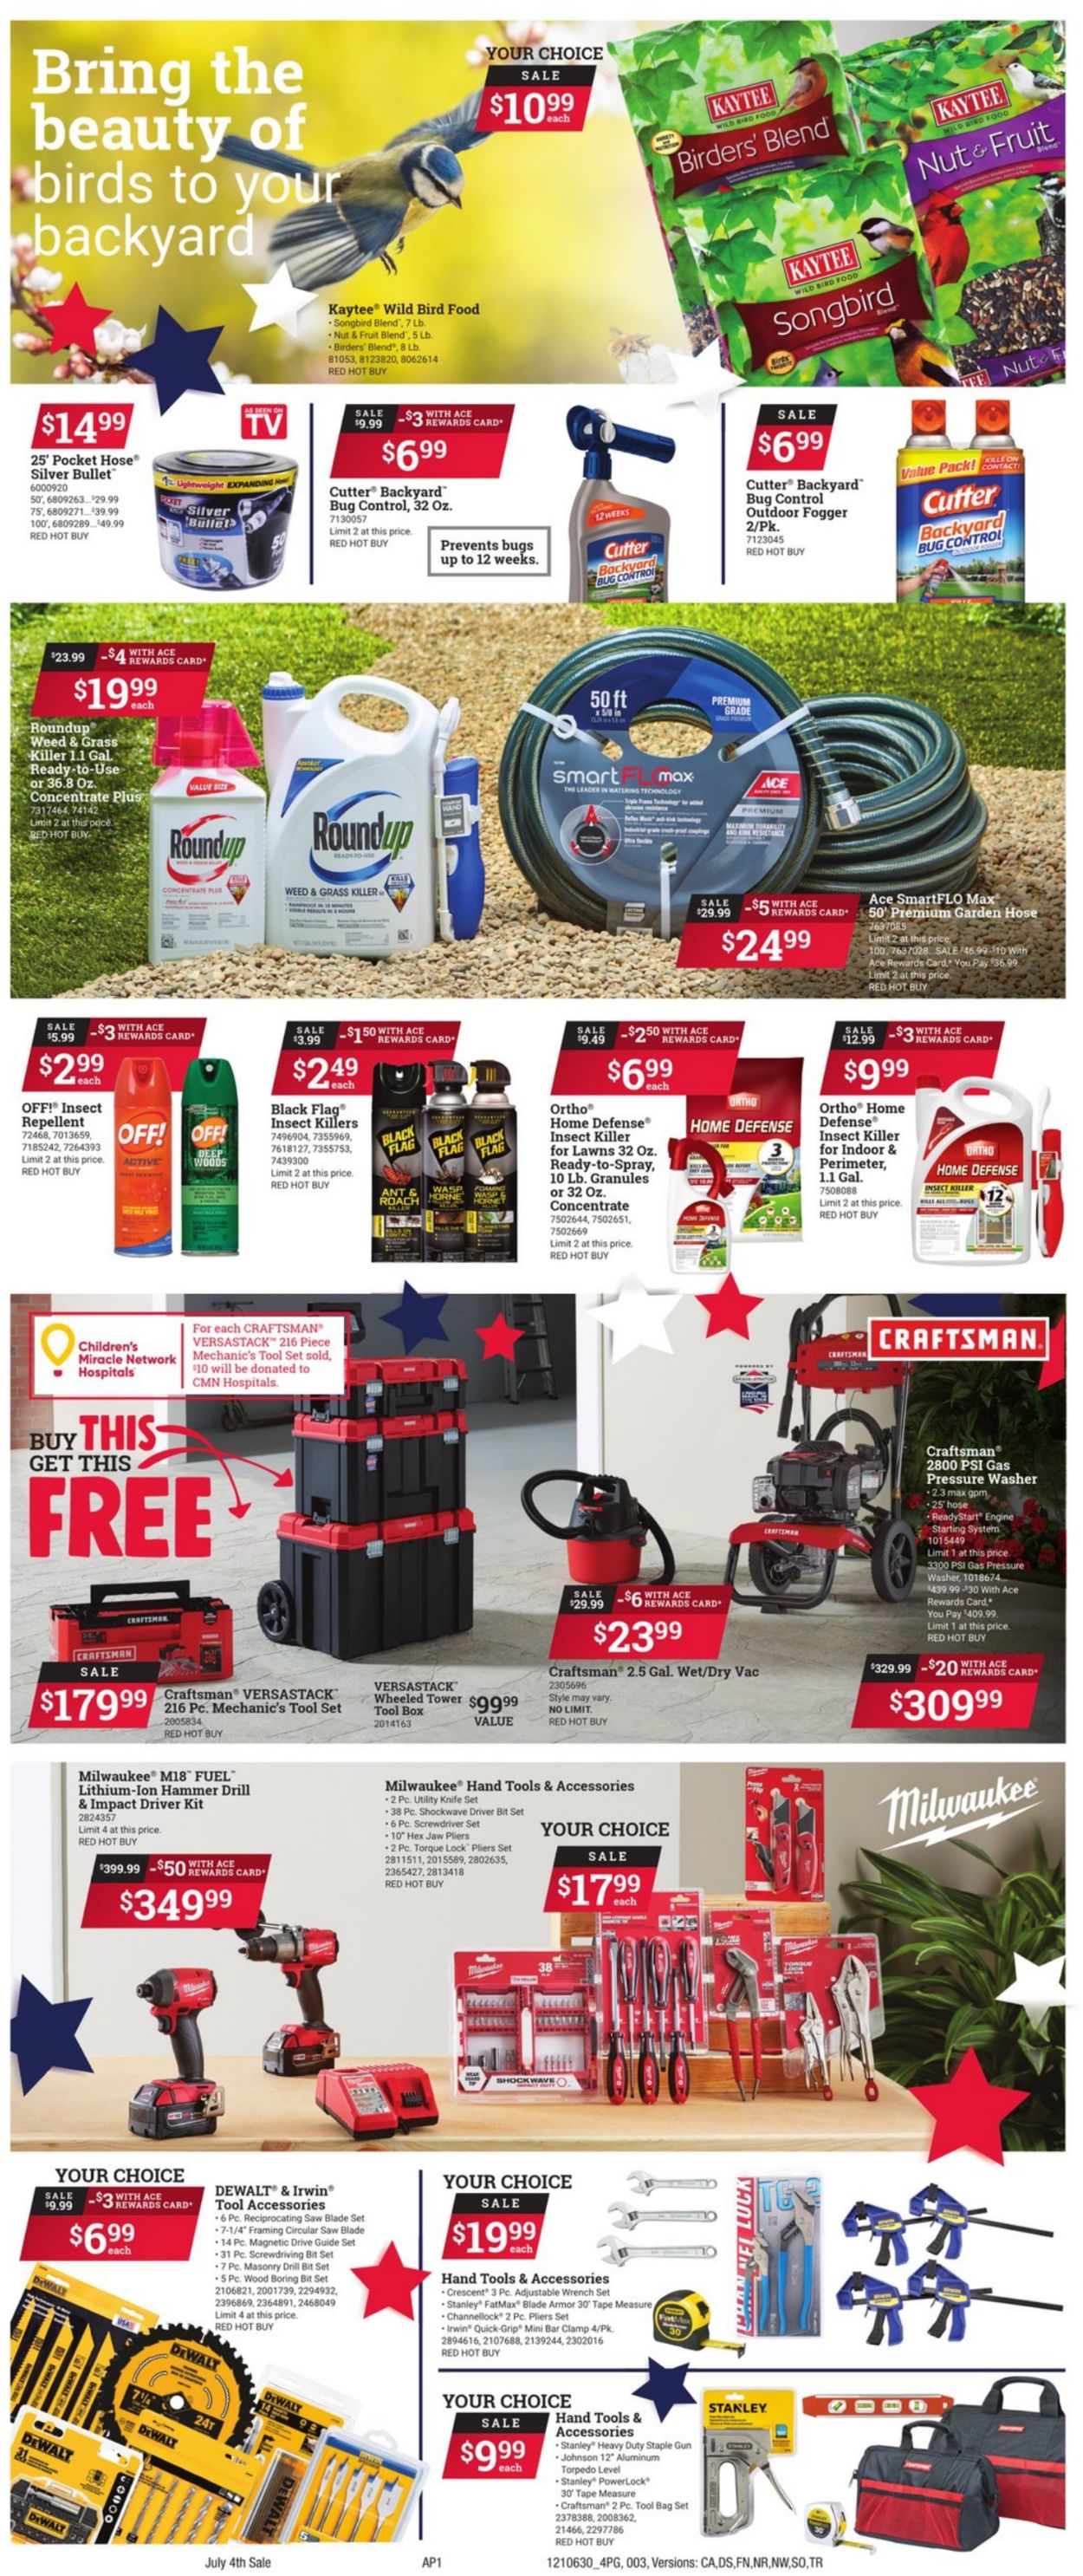 Ace Hardware Current weekly ad 06/30 07/12/2021 [3